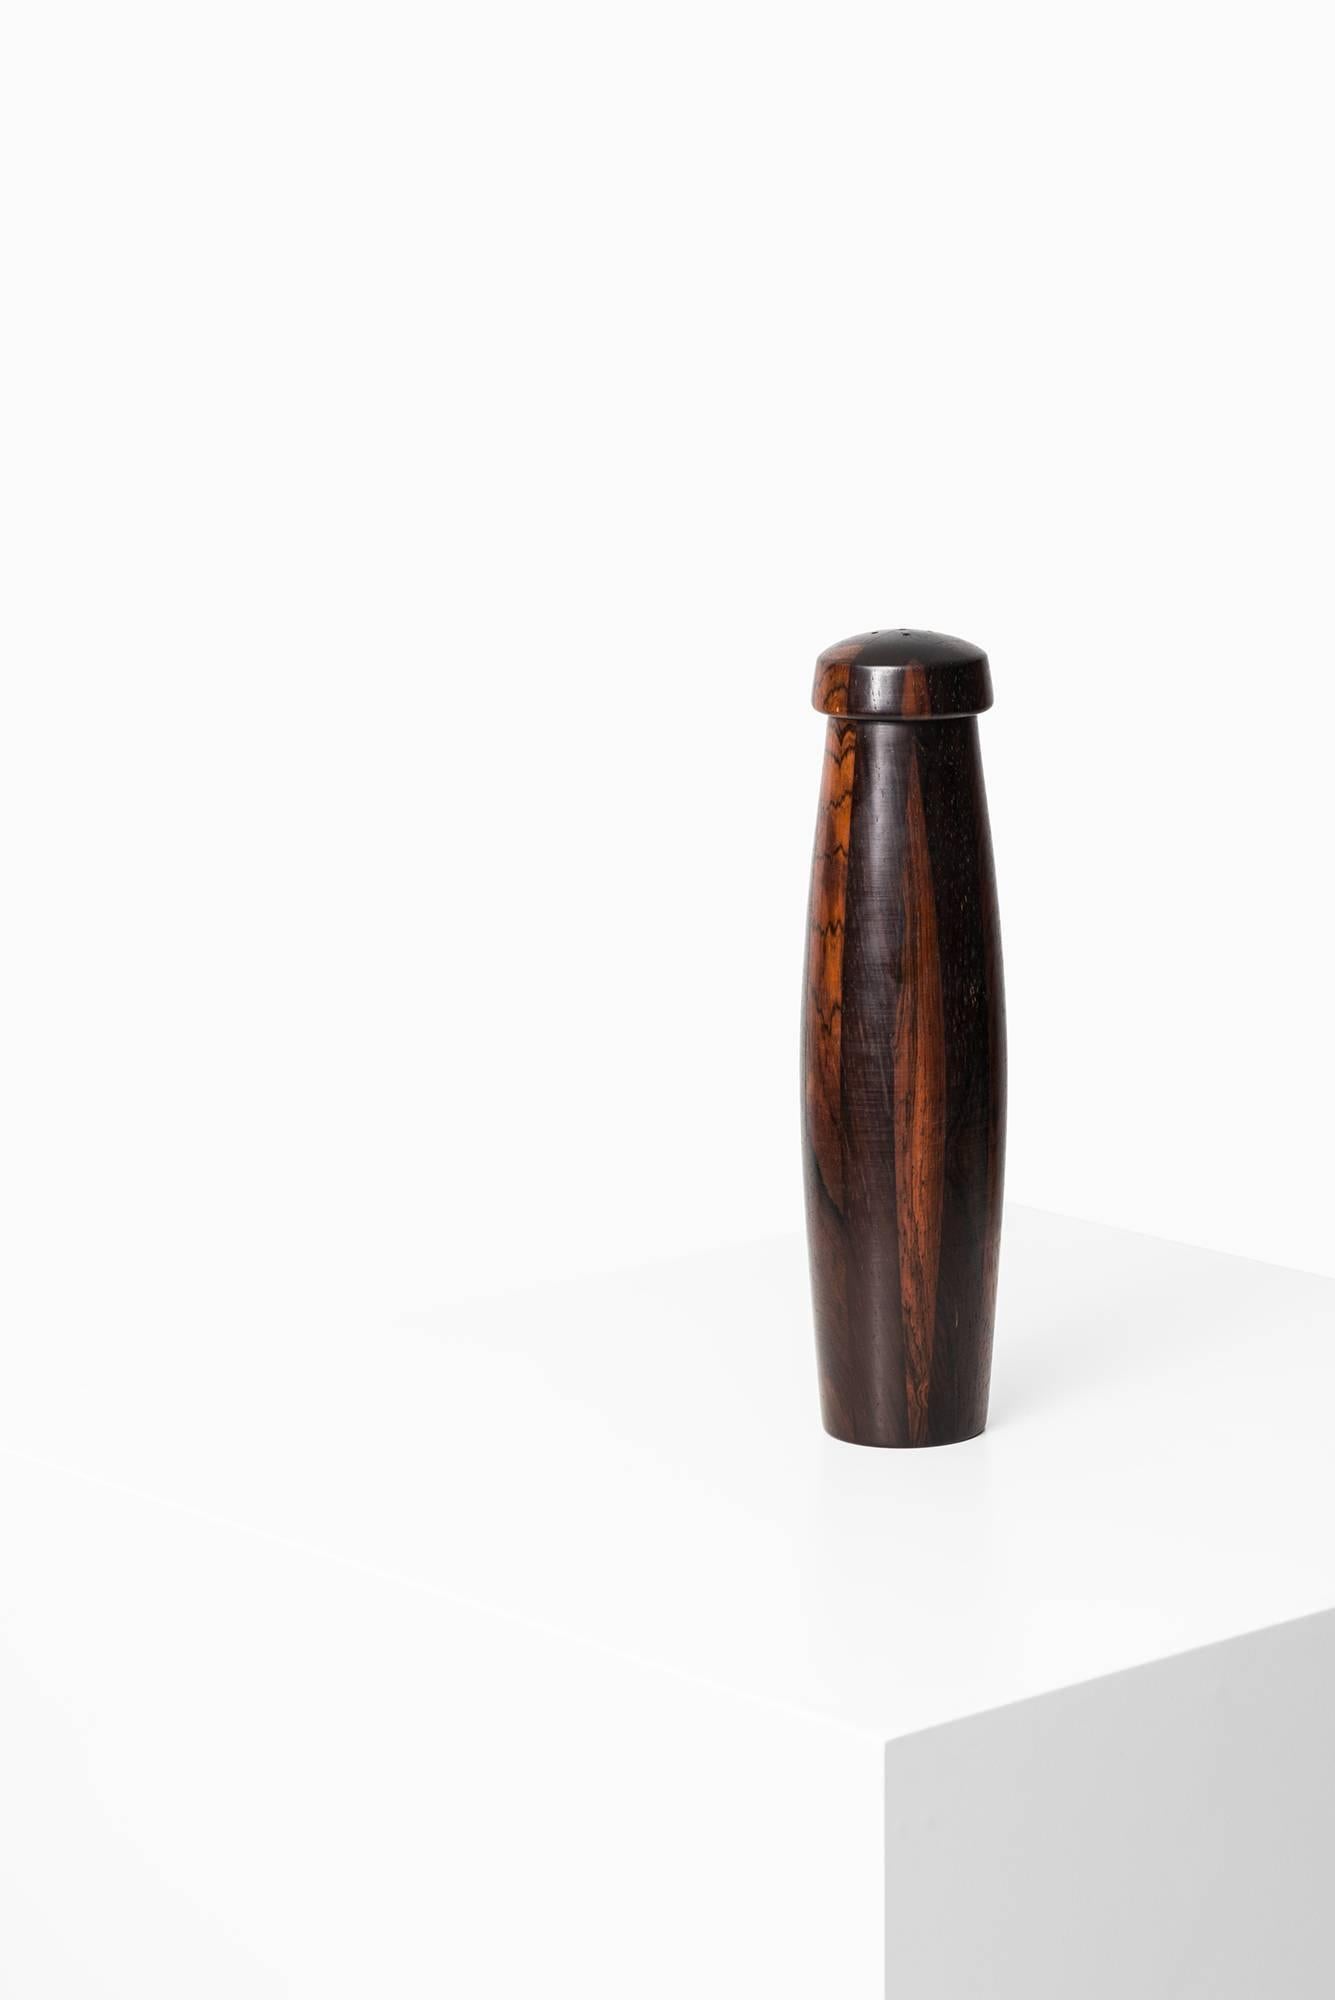 Large Salt Shaker in Solid Rosewood Produced in Denmark In Excellent Condition For Sale In Limhamn, Skåne län